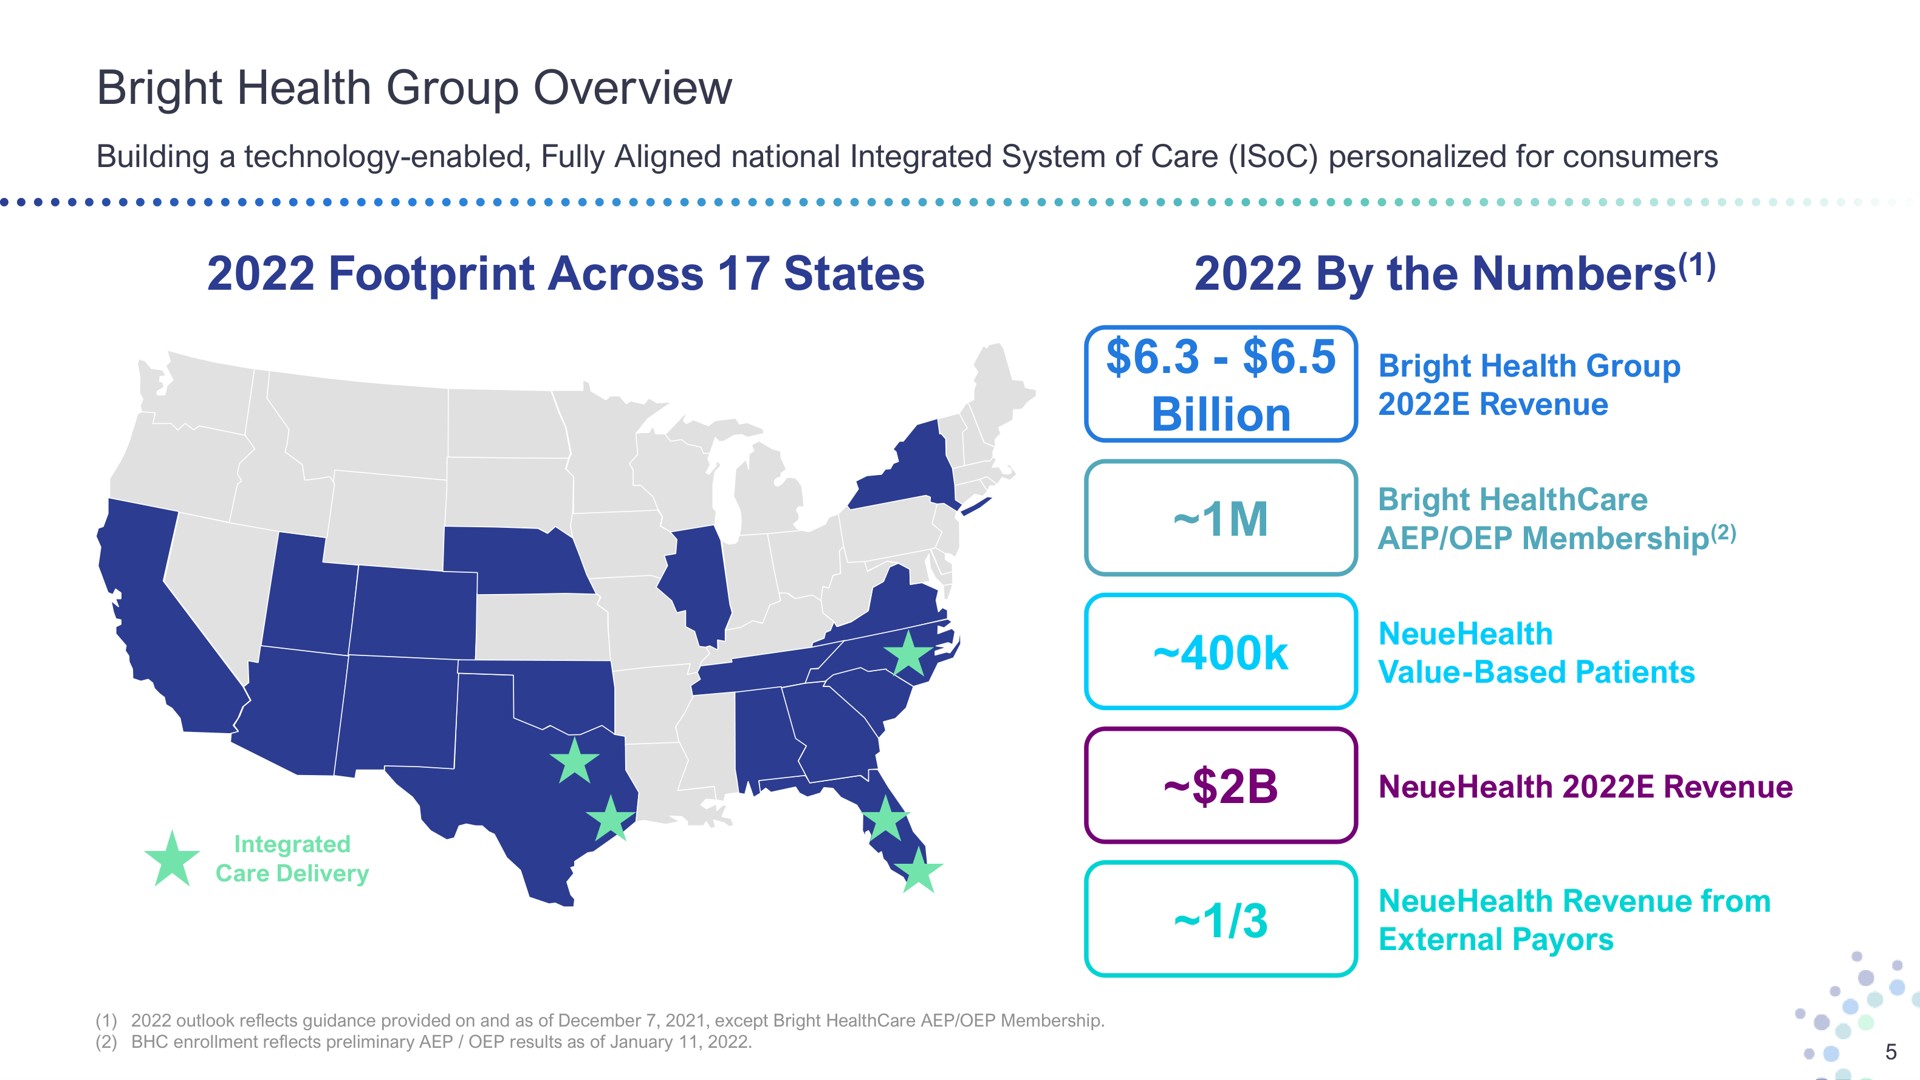 bright health group overview footprint across states by the numbers billion building a technology enabled fully aligned national integrated system of care personalized for consumers revenue membership value based patients revenue revenue from external | Bright Health Group